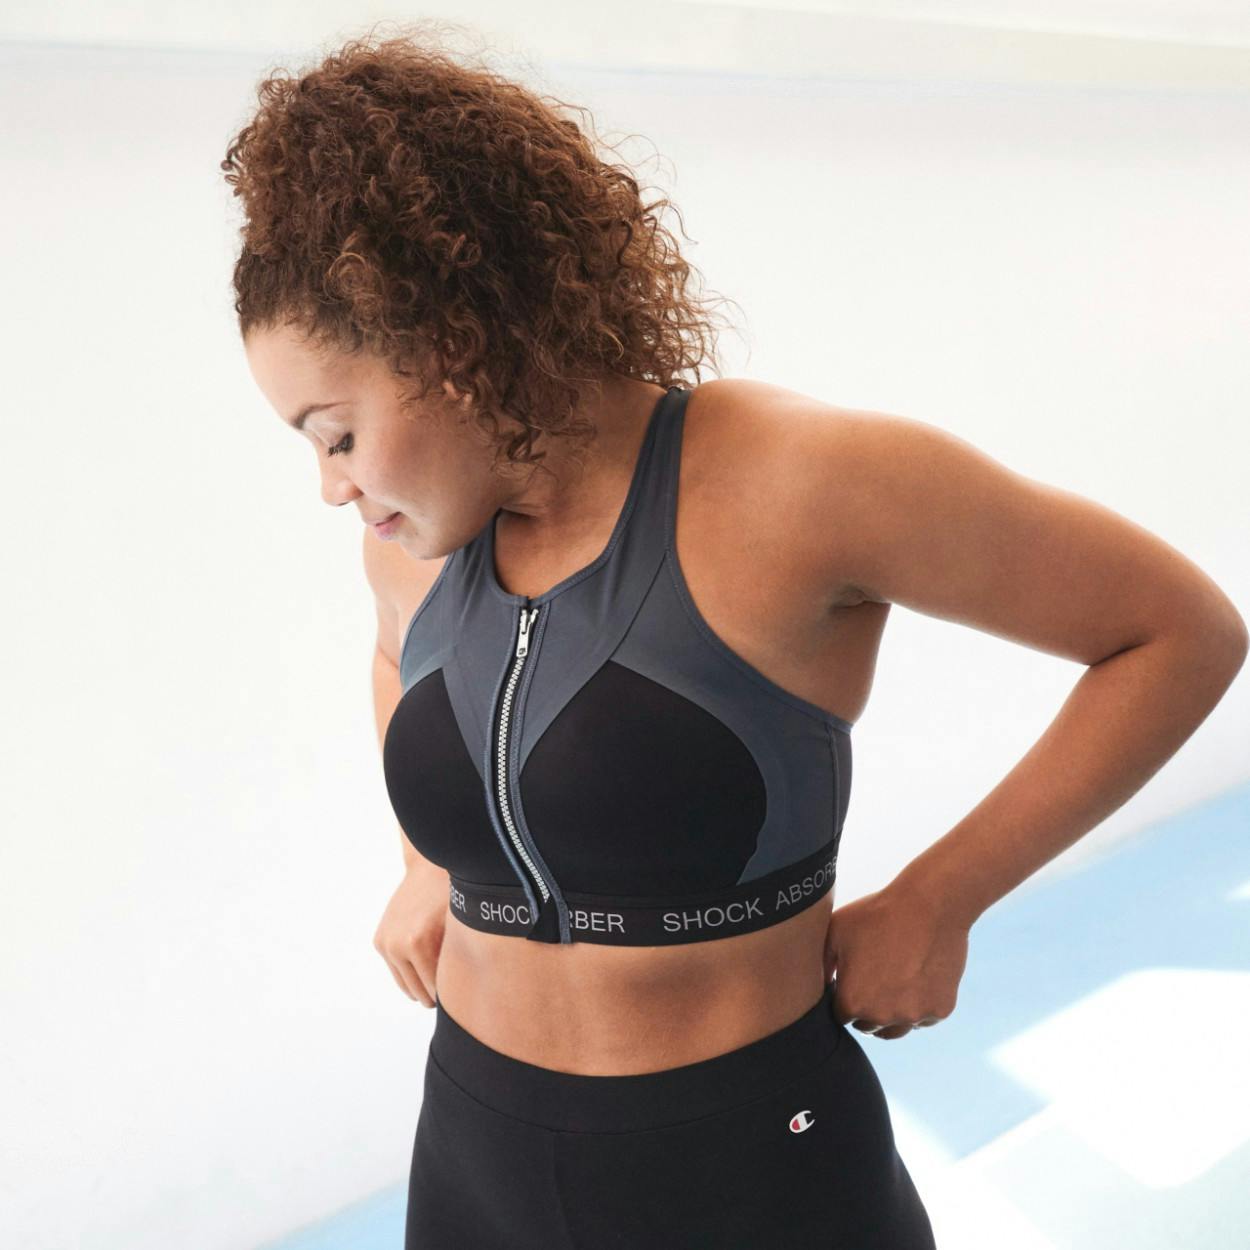 How to choose the right Sports Bra